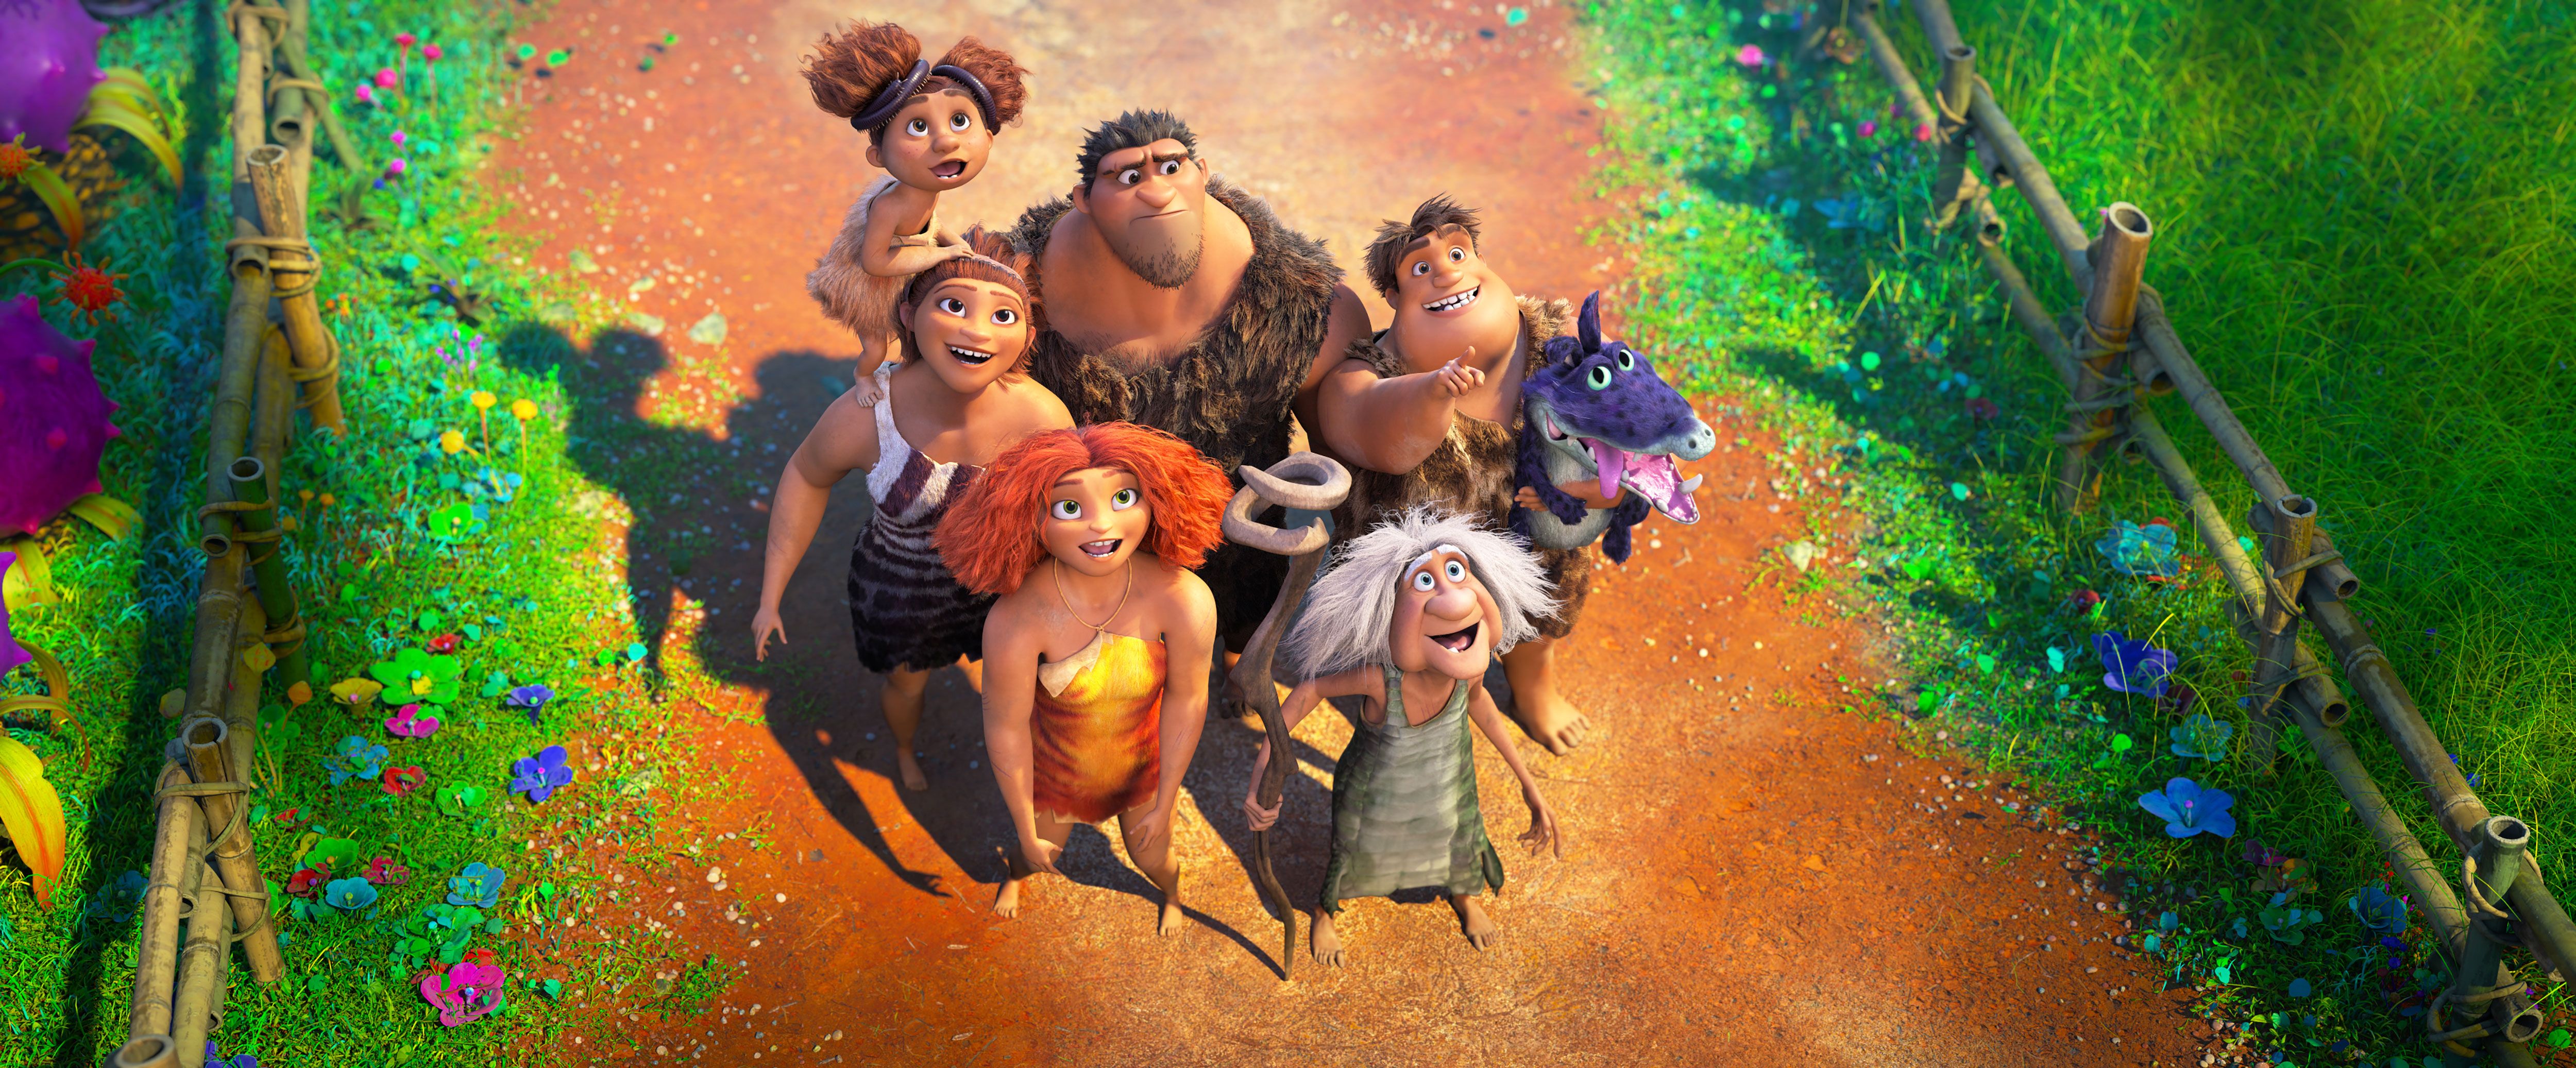 The Croods: A New Age Wallpapers